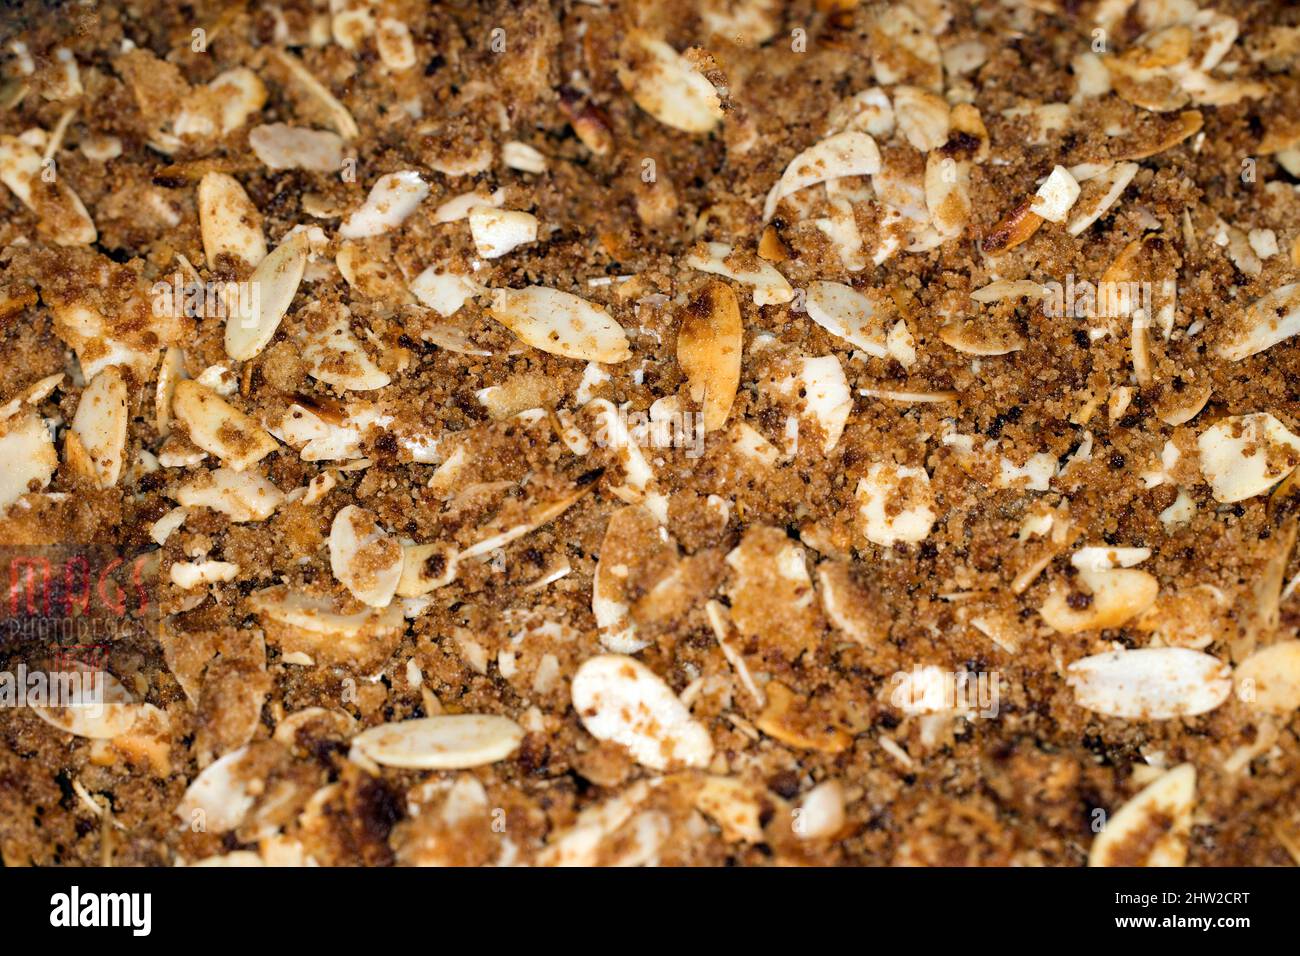 Butter crumbs with almonds Stock Photo